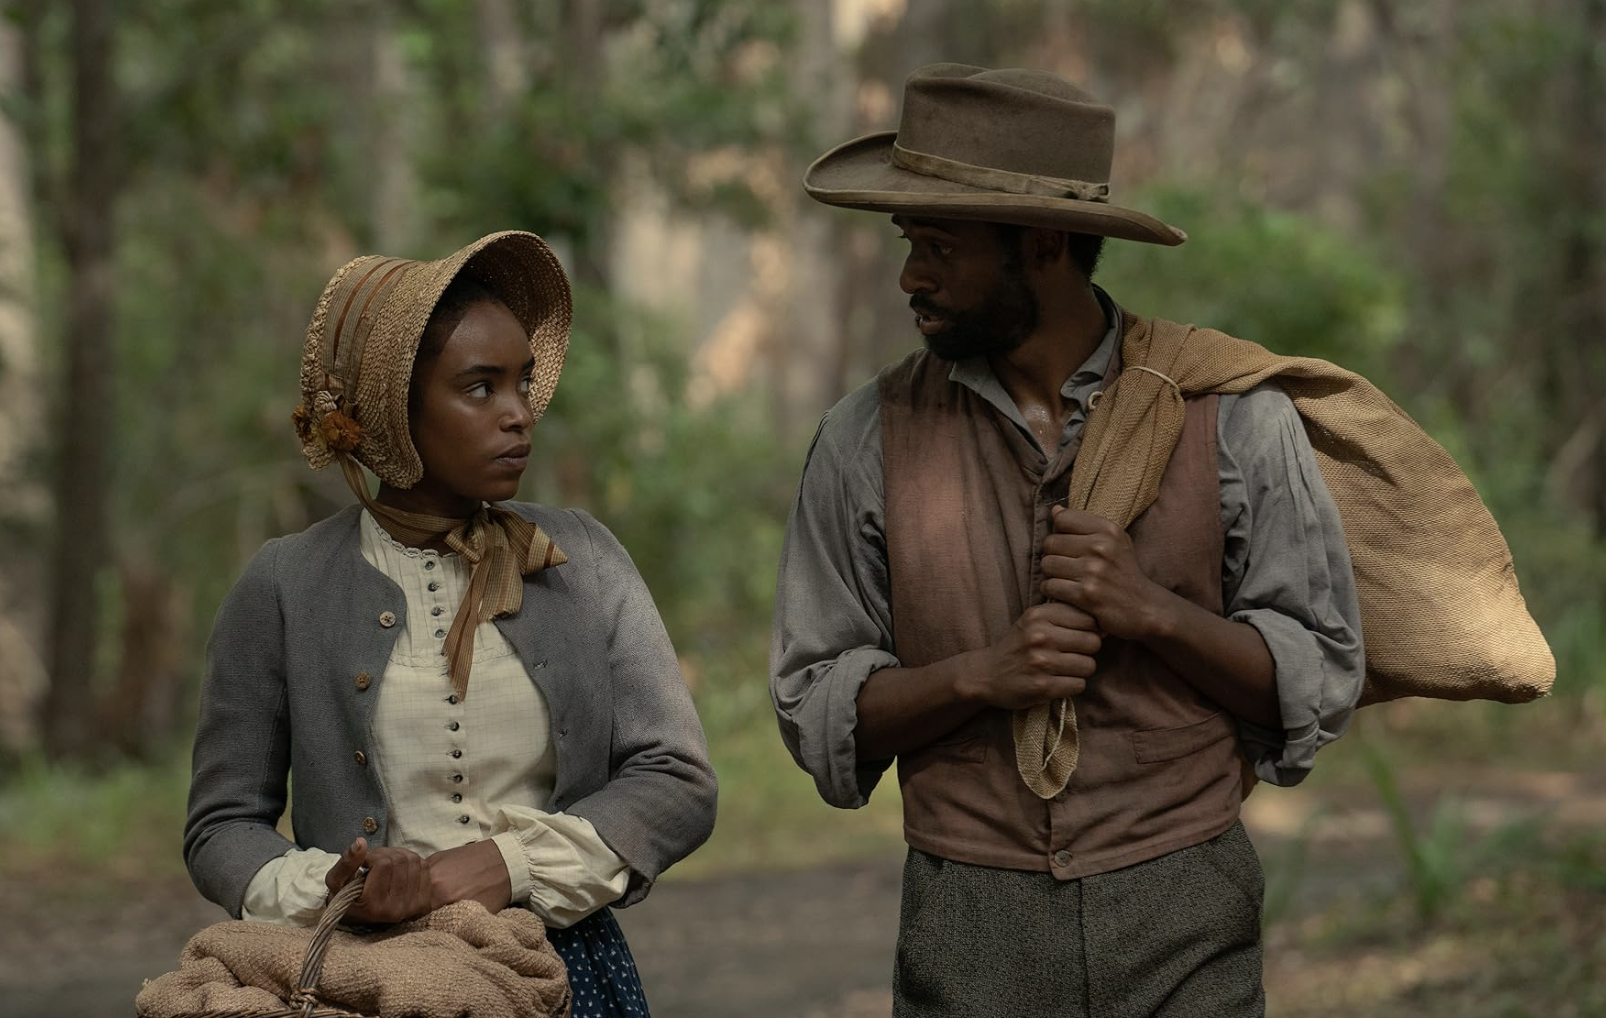 A Black woman wearing a bonnet and carrying a basket walks through the woods with a Black man who is carrying a sack and wearing period clothing from the 1860s.